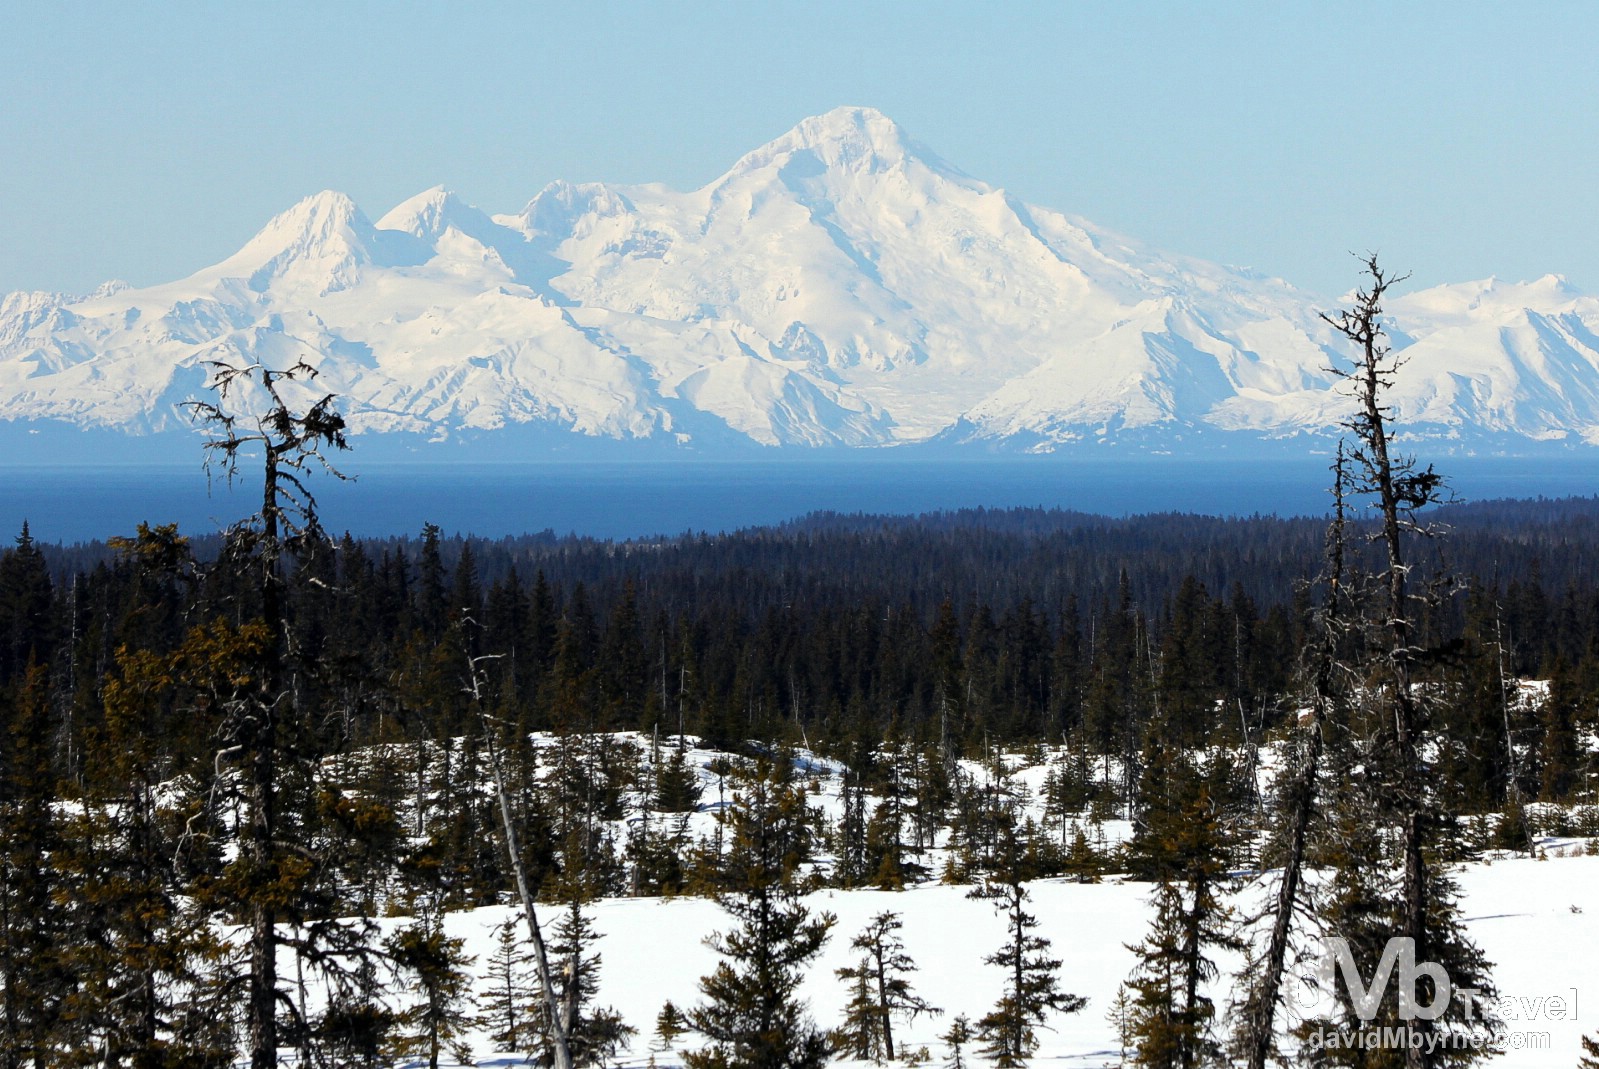 Mount Redoubt as seen from Skyline Drive in Homer, Alaska, USA. March 17th 2013. 